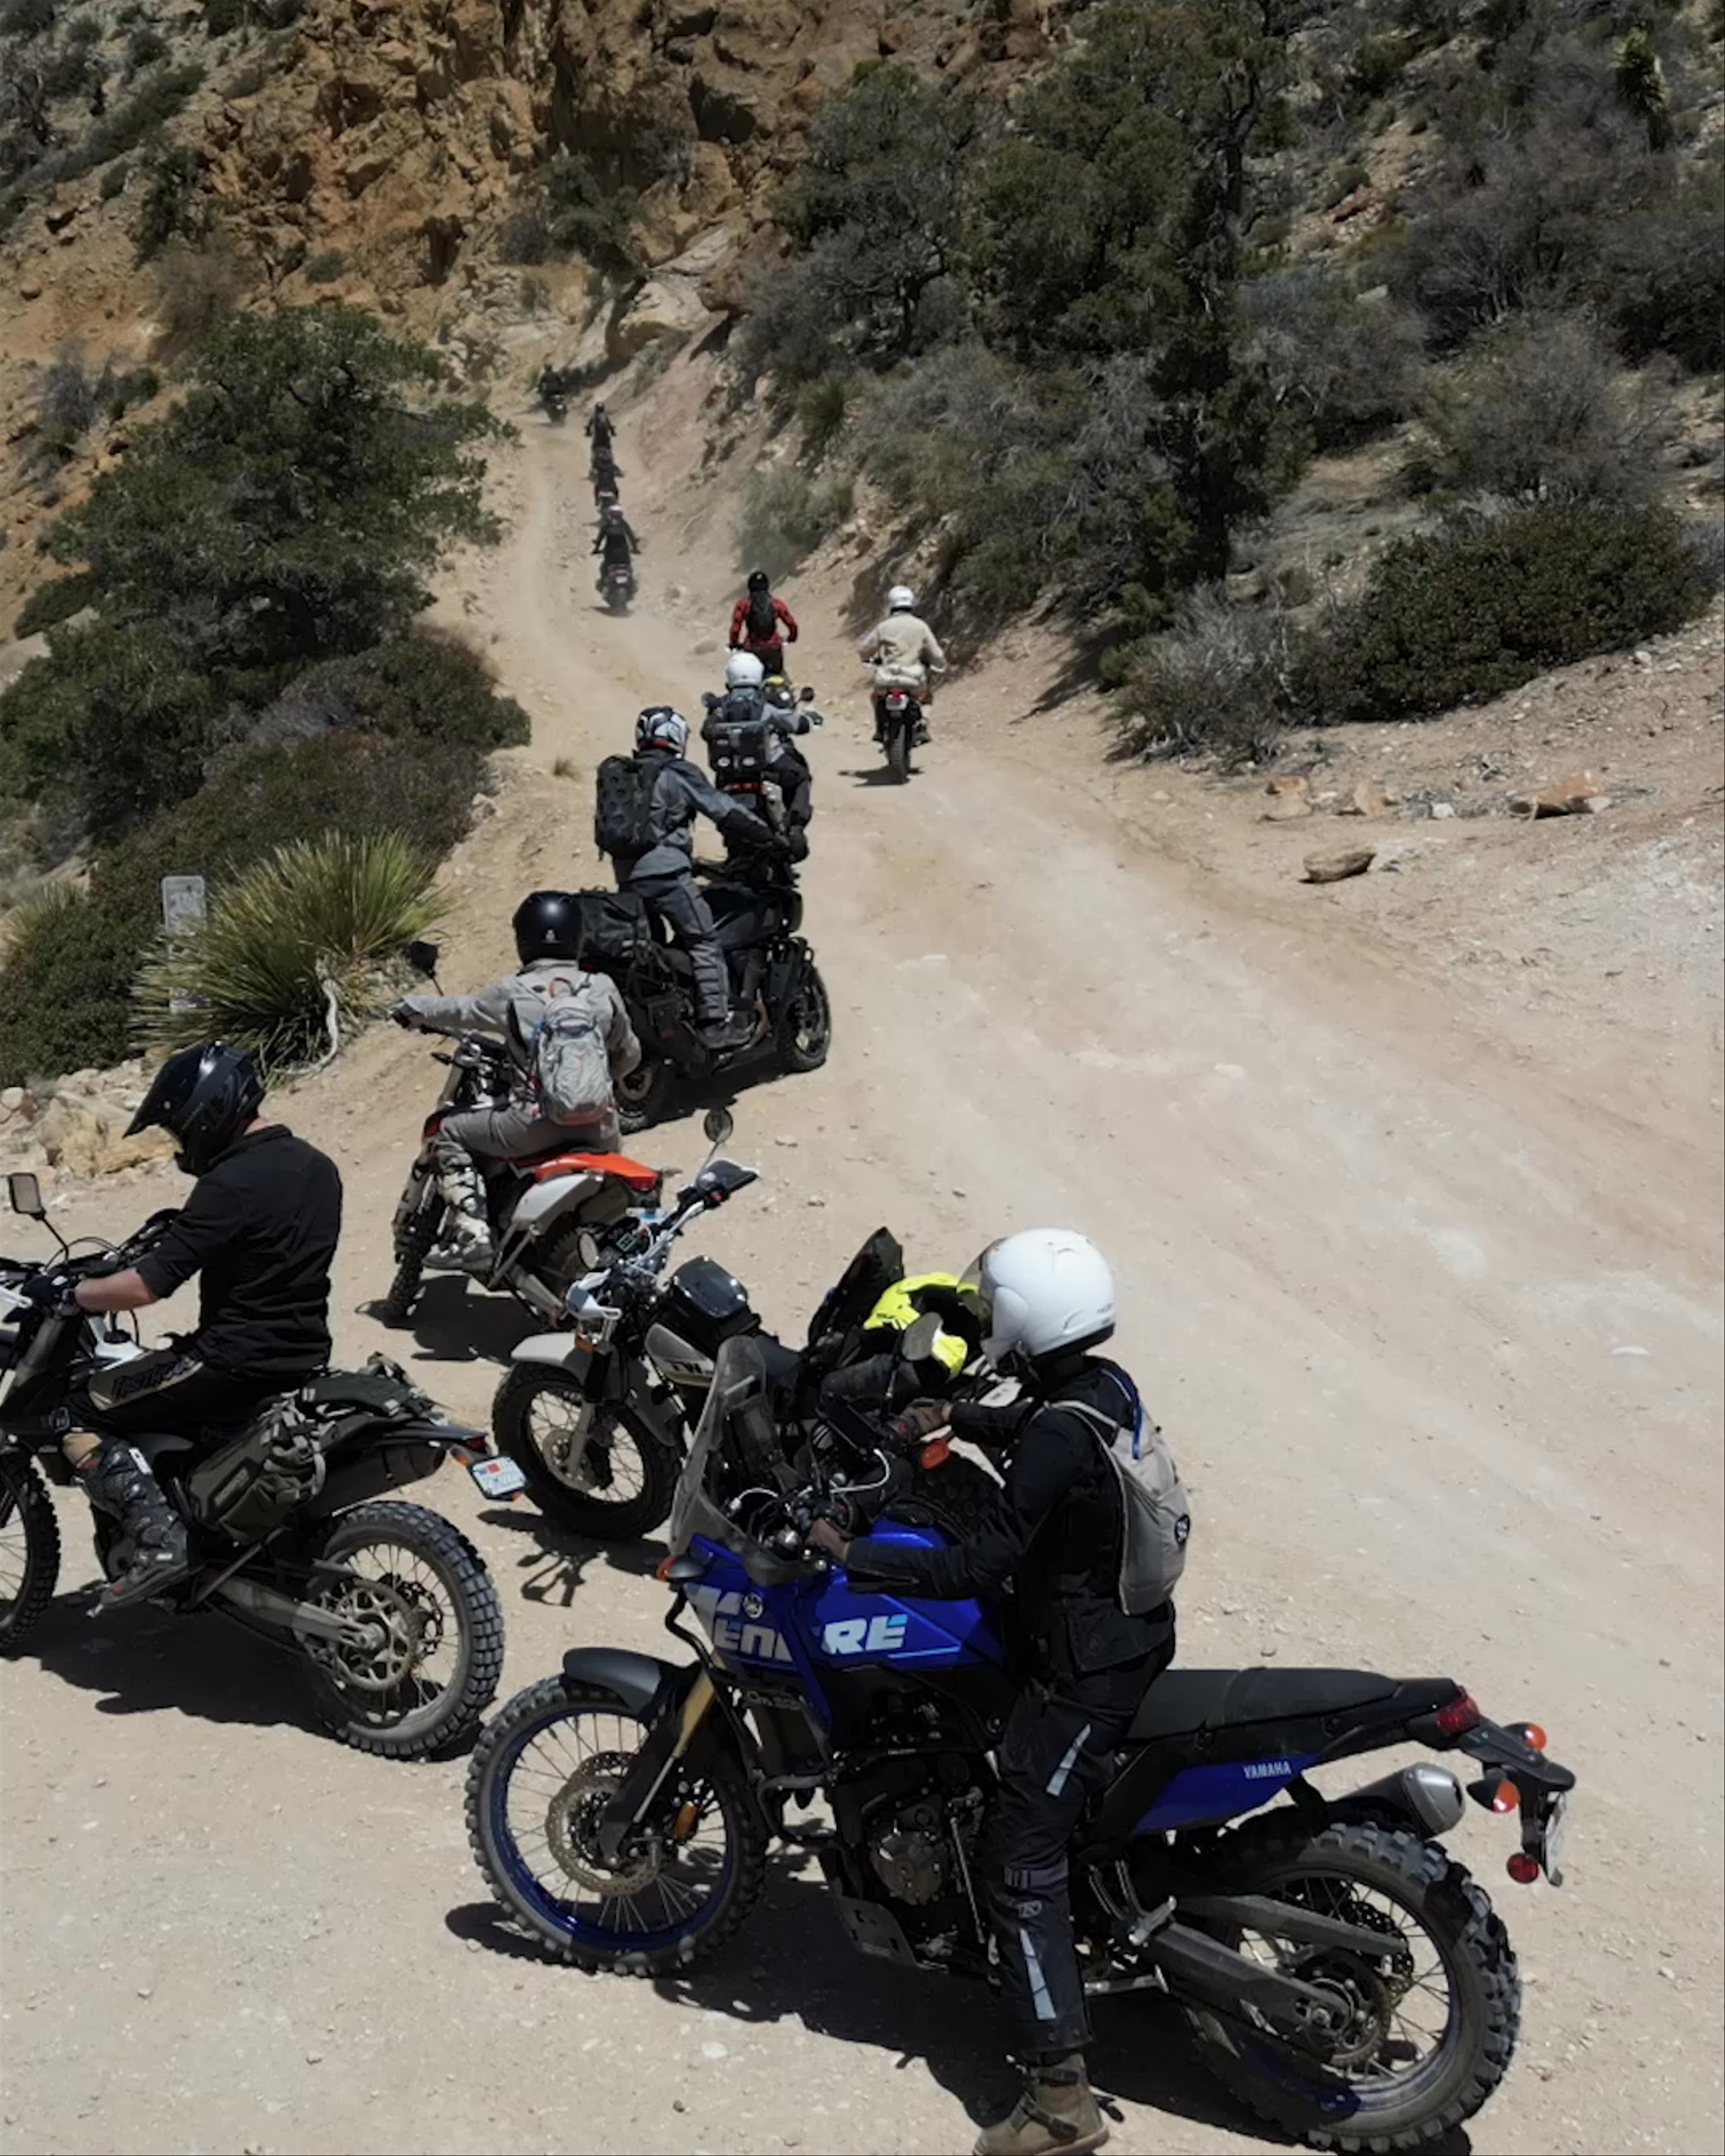 Drone view of motorcyclists riding through desert mountain path